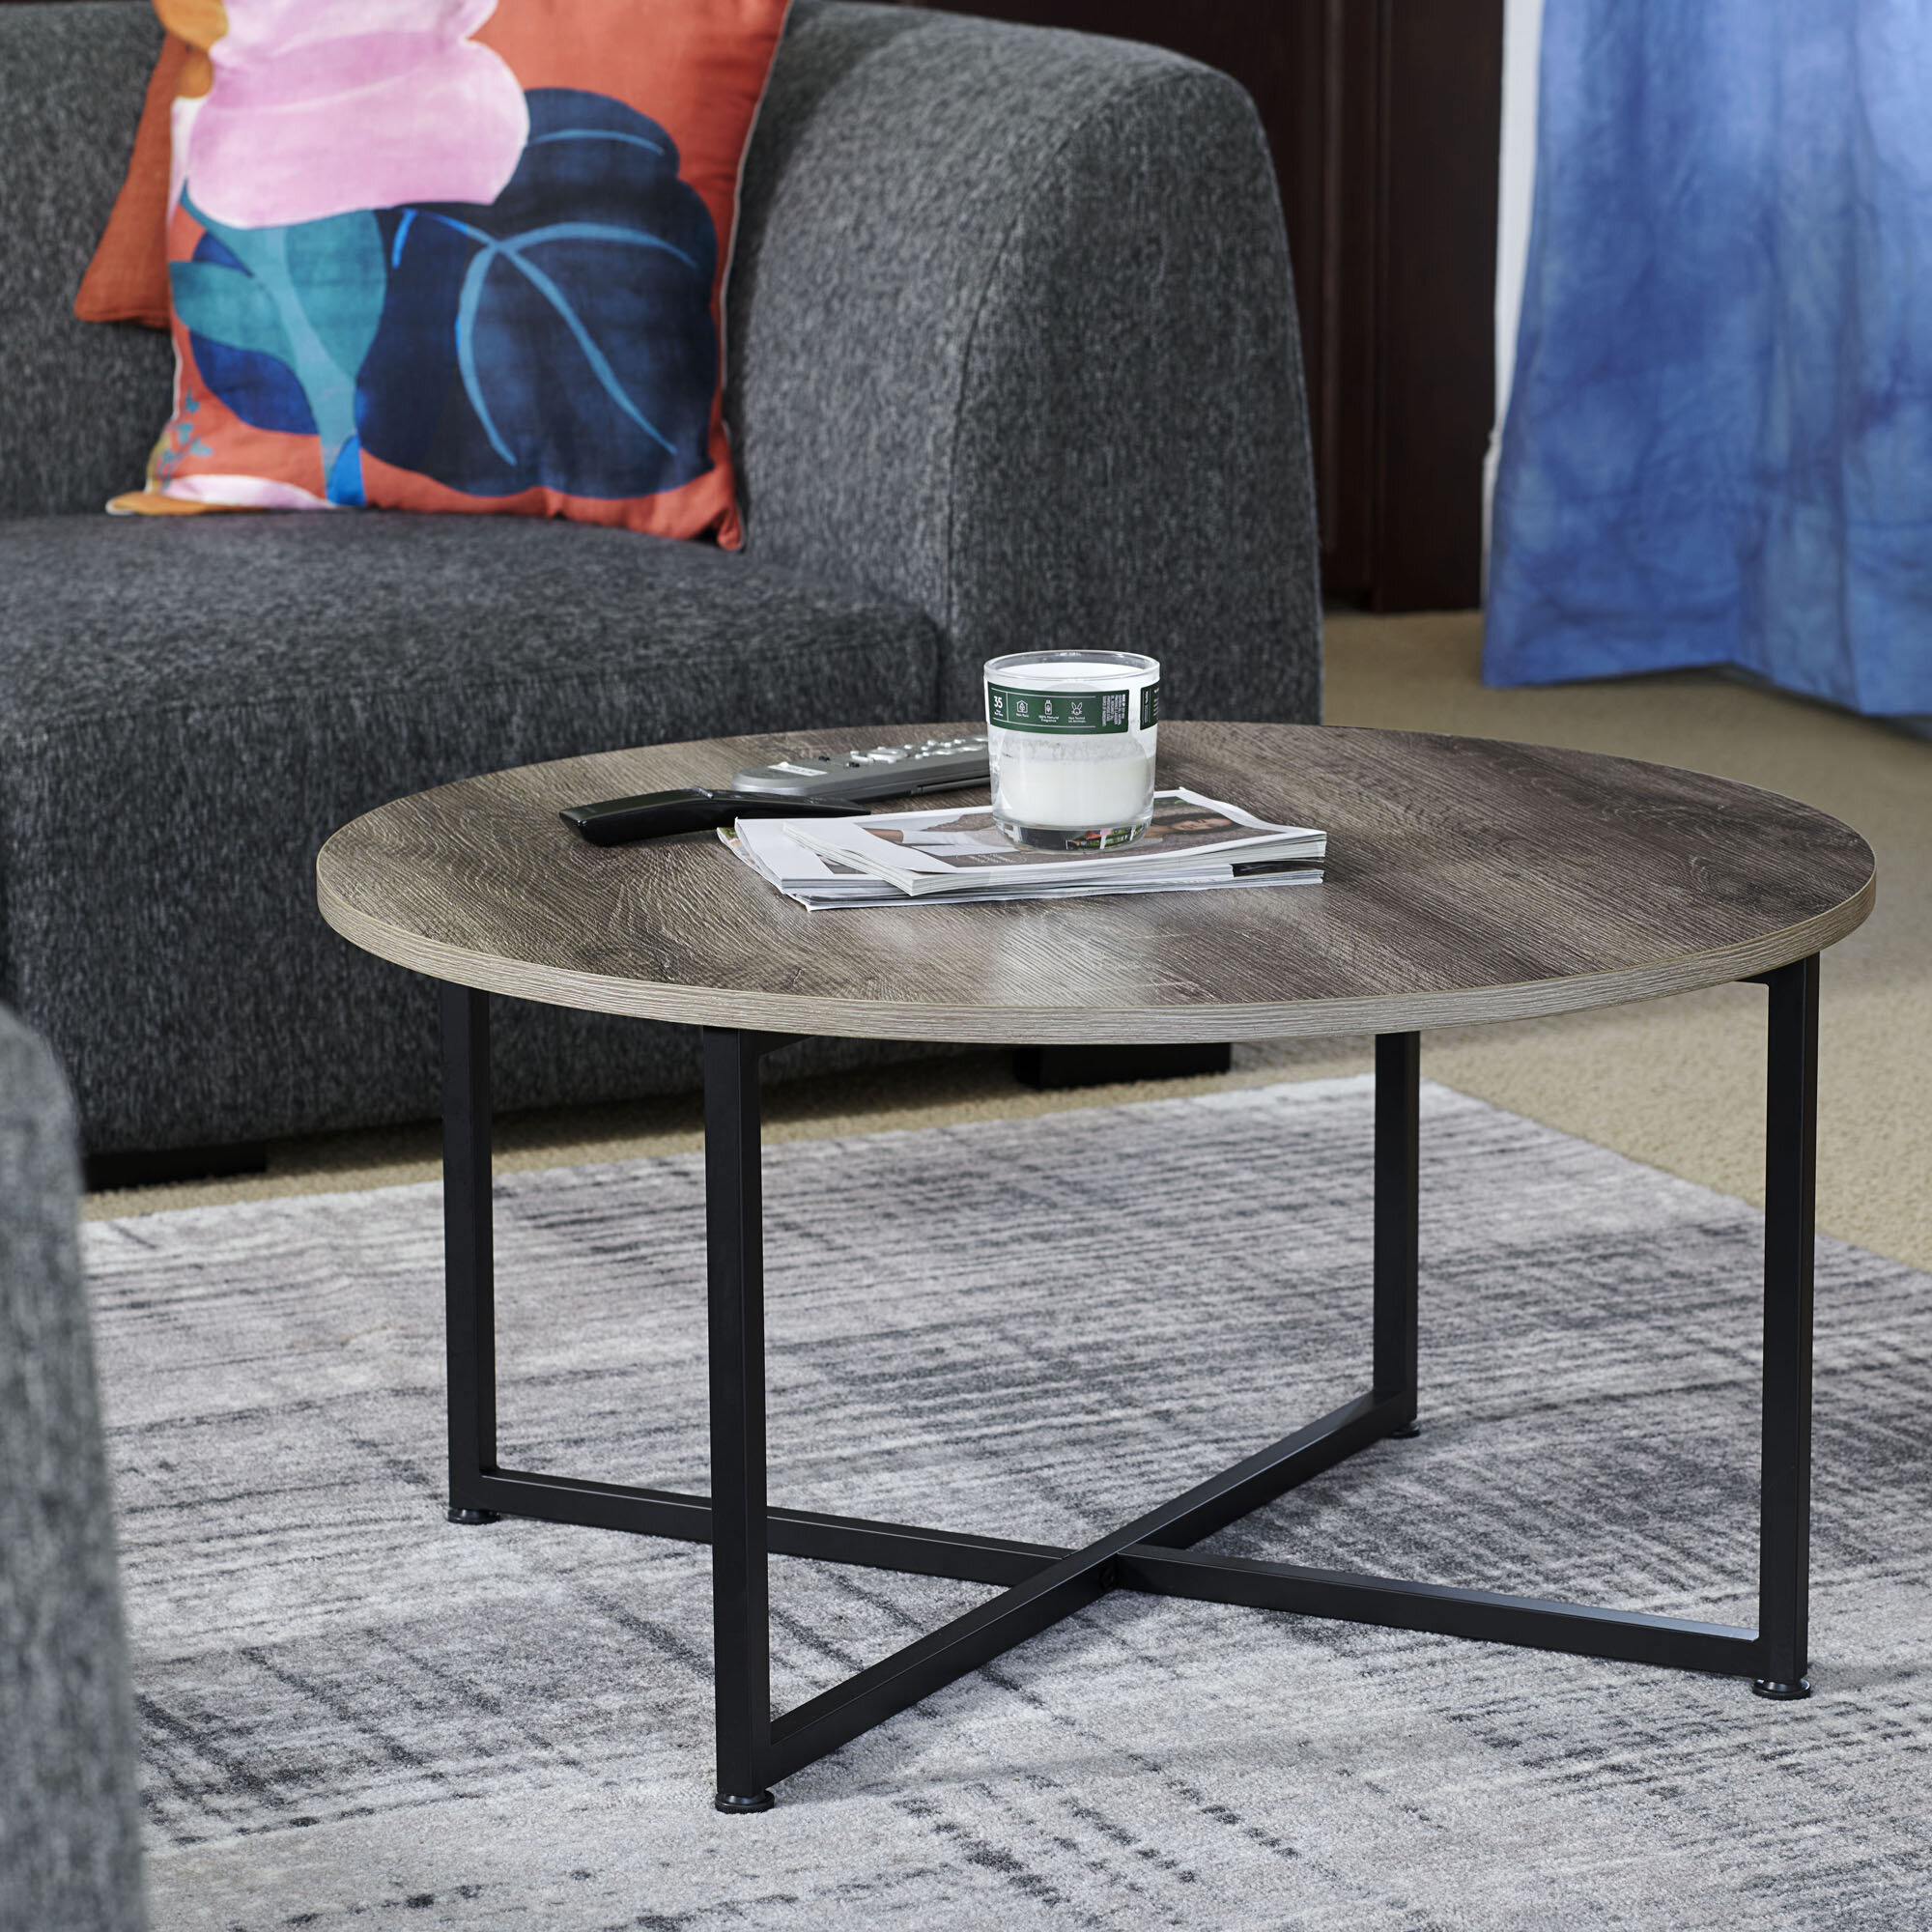 Saygoer Morden Coffee Table Irregular Living Room Table Drop Shape Accent Table Contmporary Style Leisure Tea Table Cocktail Table Walnut Oak 45Inch